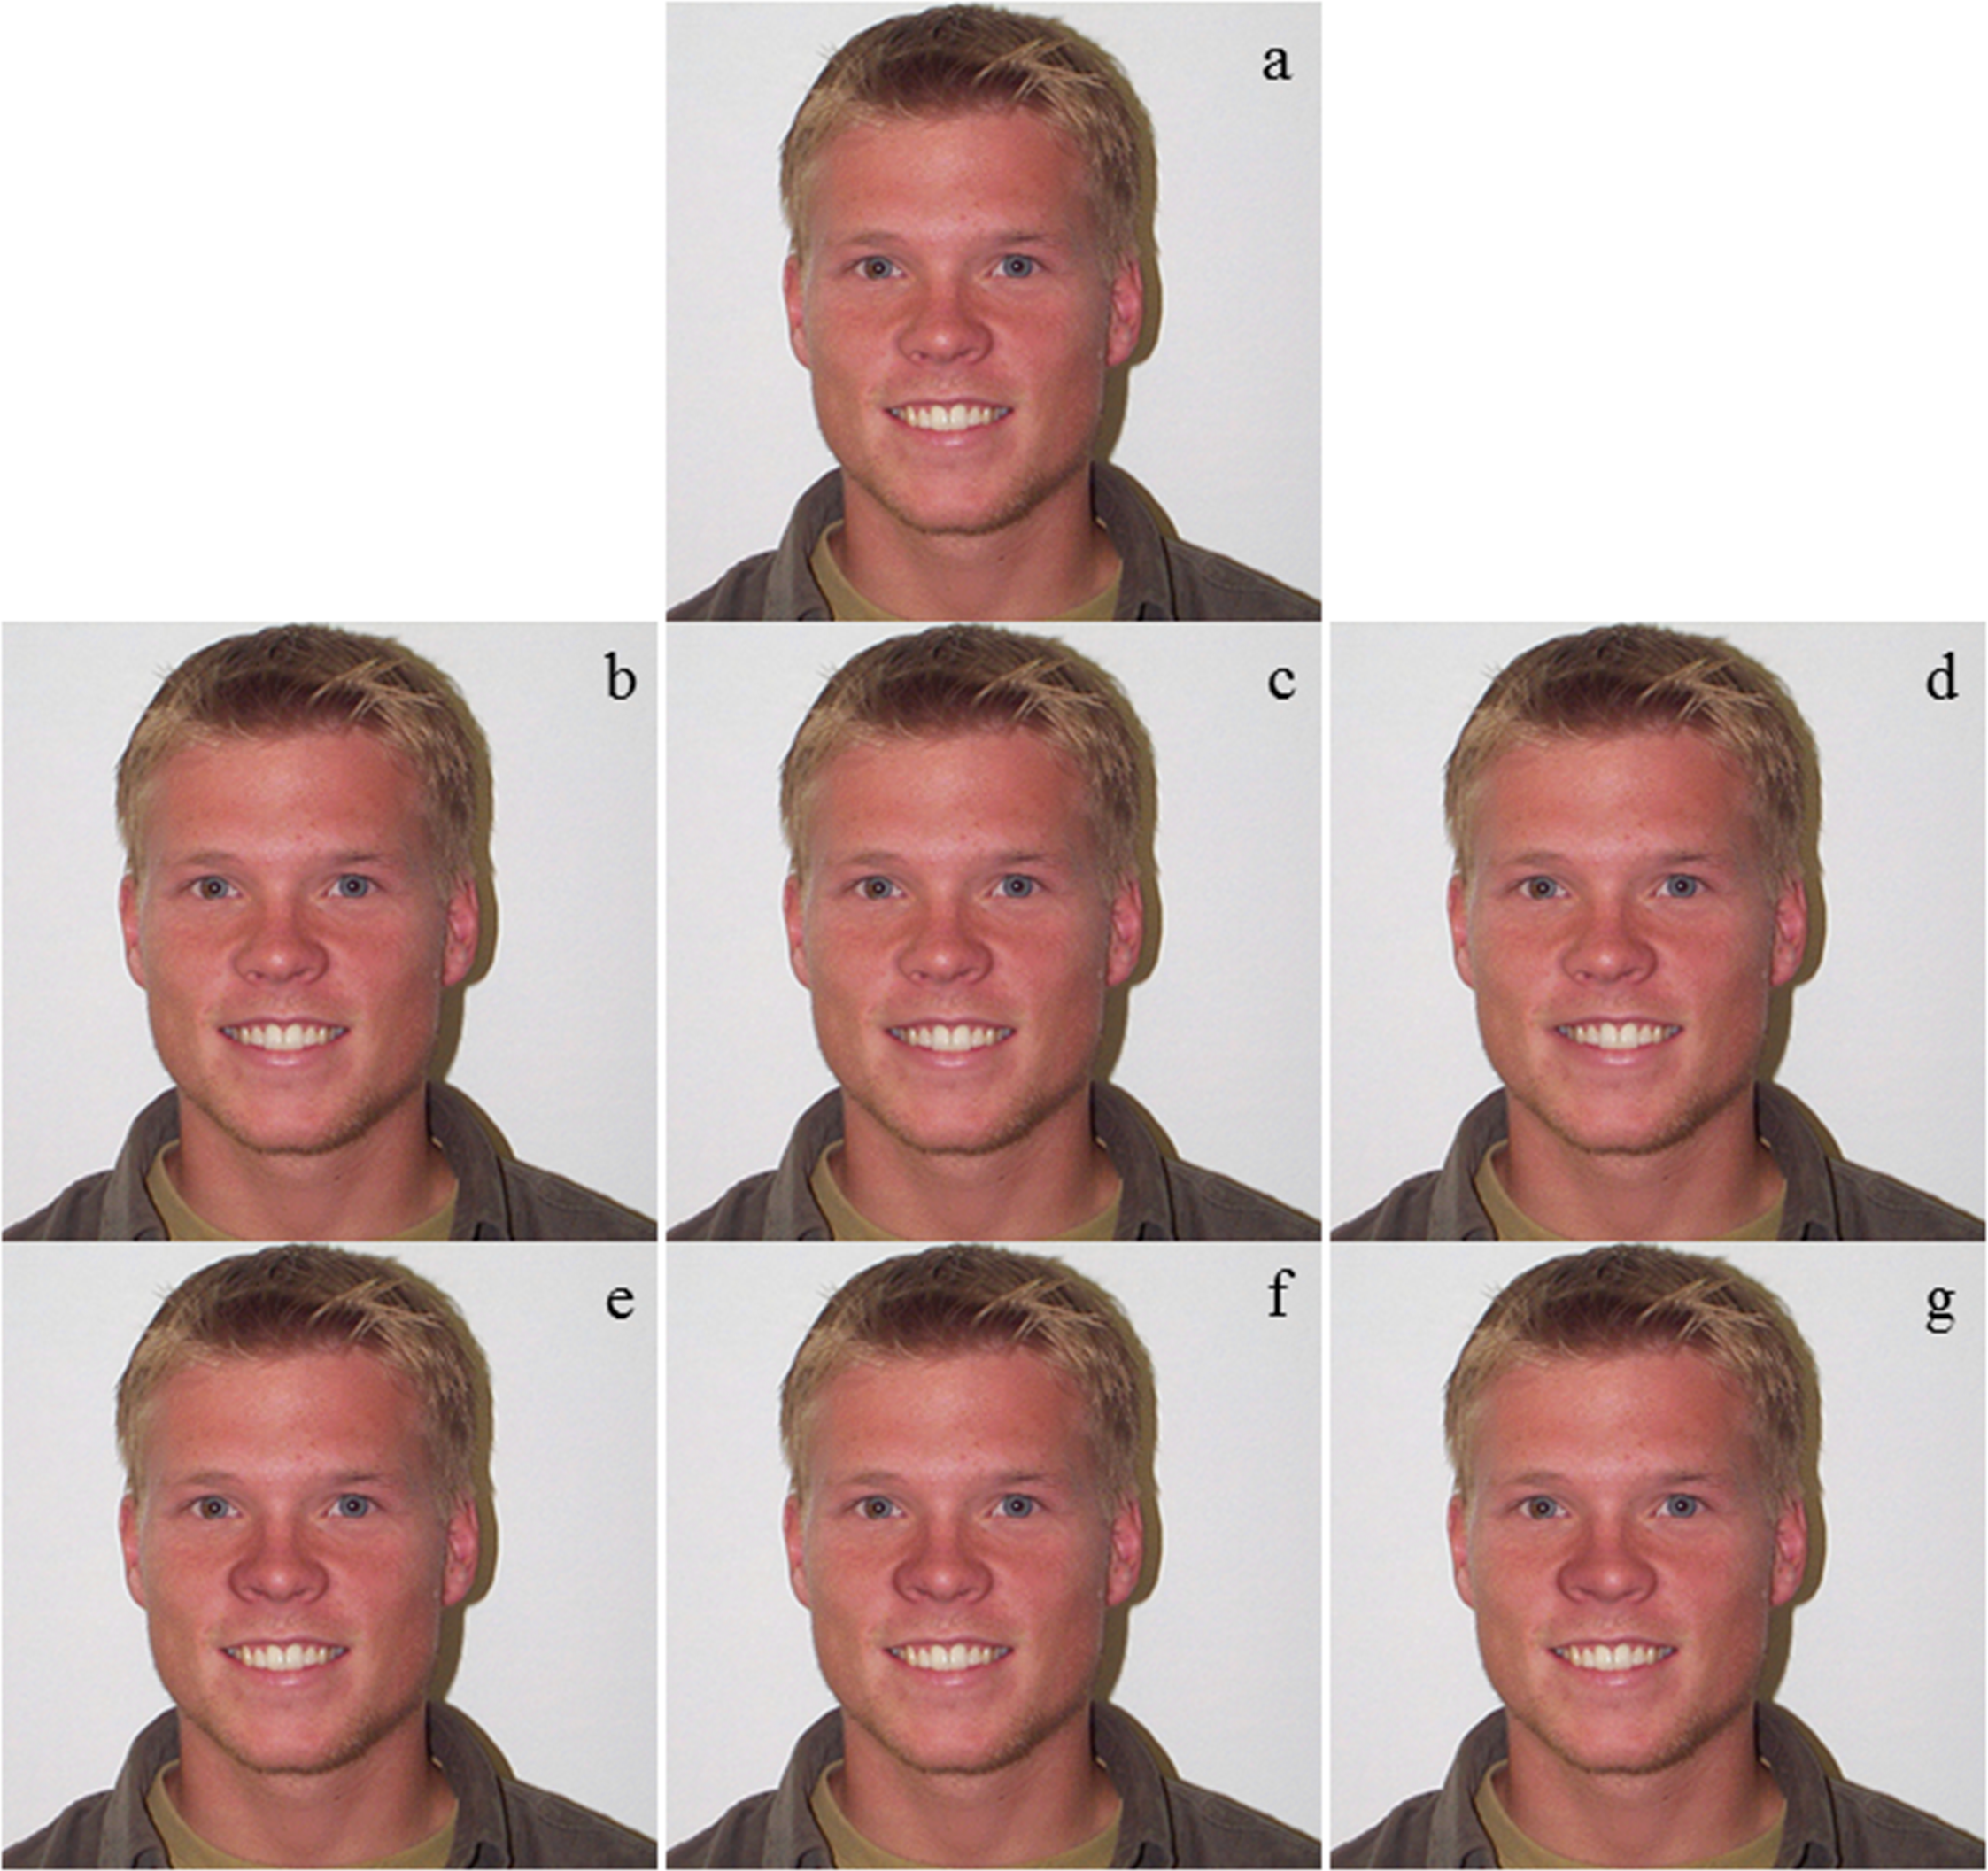 Figure 1: A set of pictures used for attractiveness evaluation. One set of pictures, in which the right side of the nose and the mouth were used to make the trait symmetric (A) unmanipulated face (B) right symmetric, centered mouth (C) right symmetric mouth, skewed 0.5 cm to the right (D) right symmetric mouth, skewed 1.0 cm to the right (E) right symmetric, centered nose (F) right symmetric nose, nose tip skewed 0.5 cm to the right (G) right symmetric nose, nose tip skewed 1.0 cm to the right.